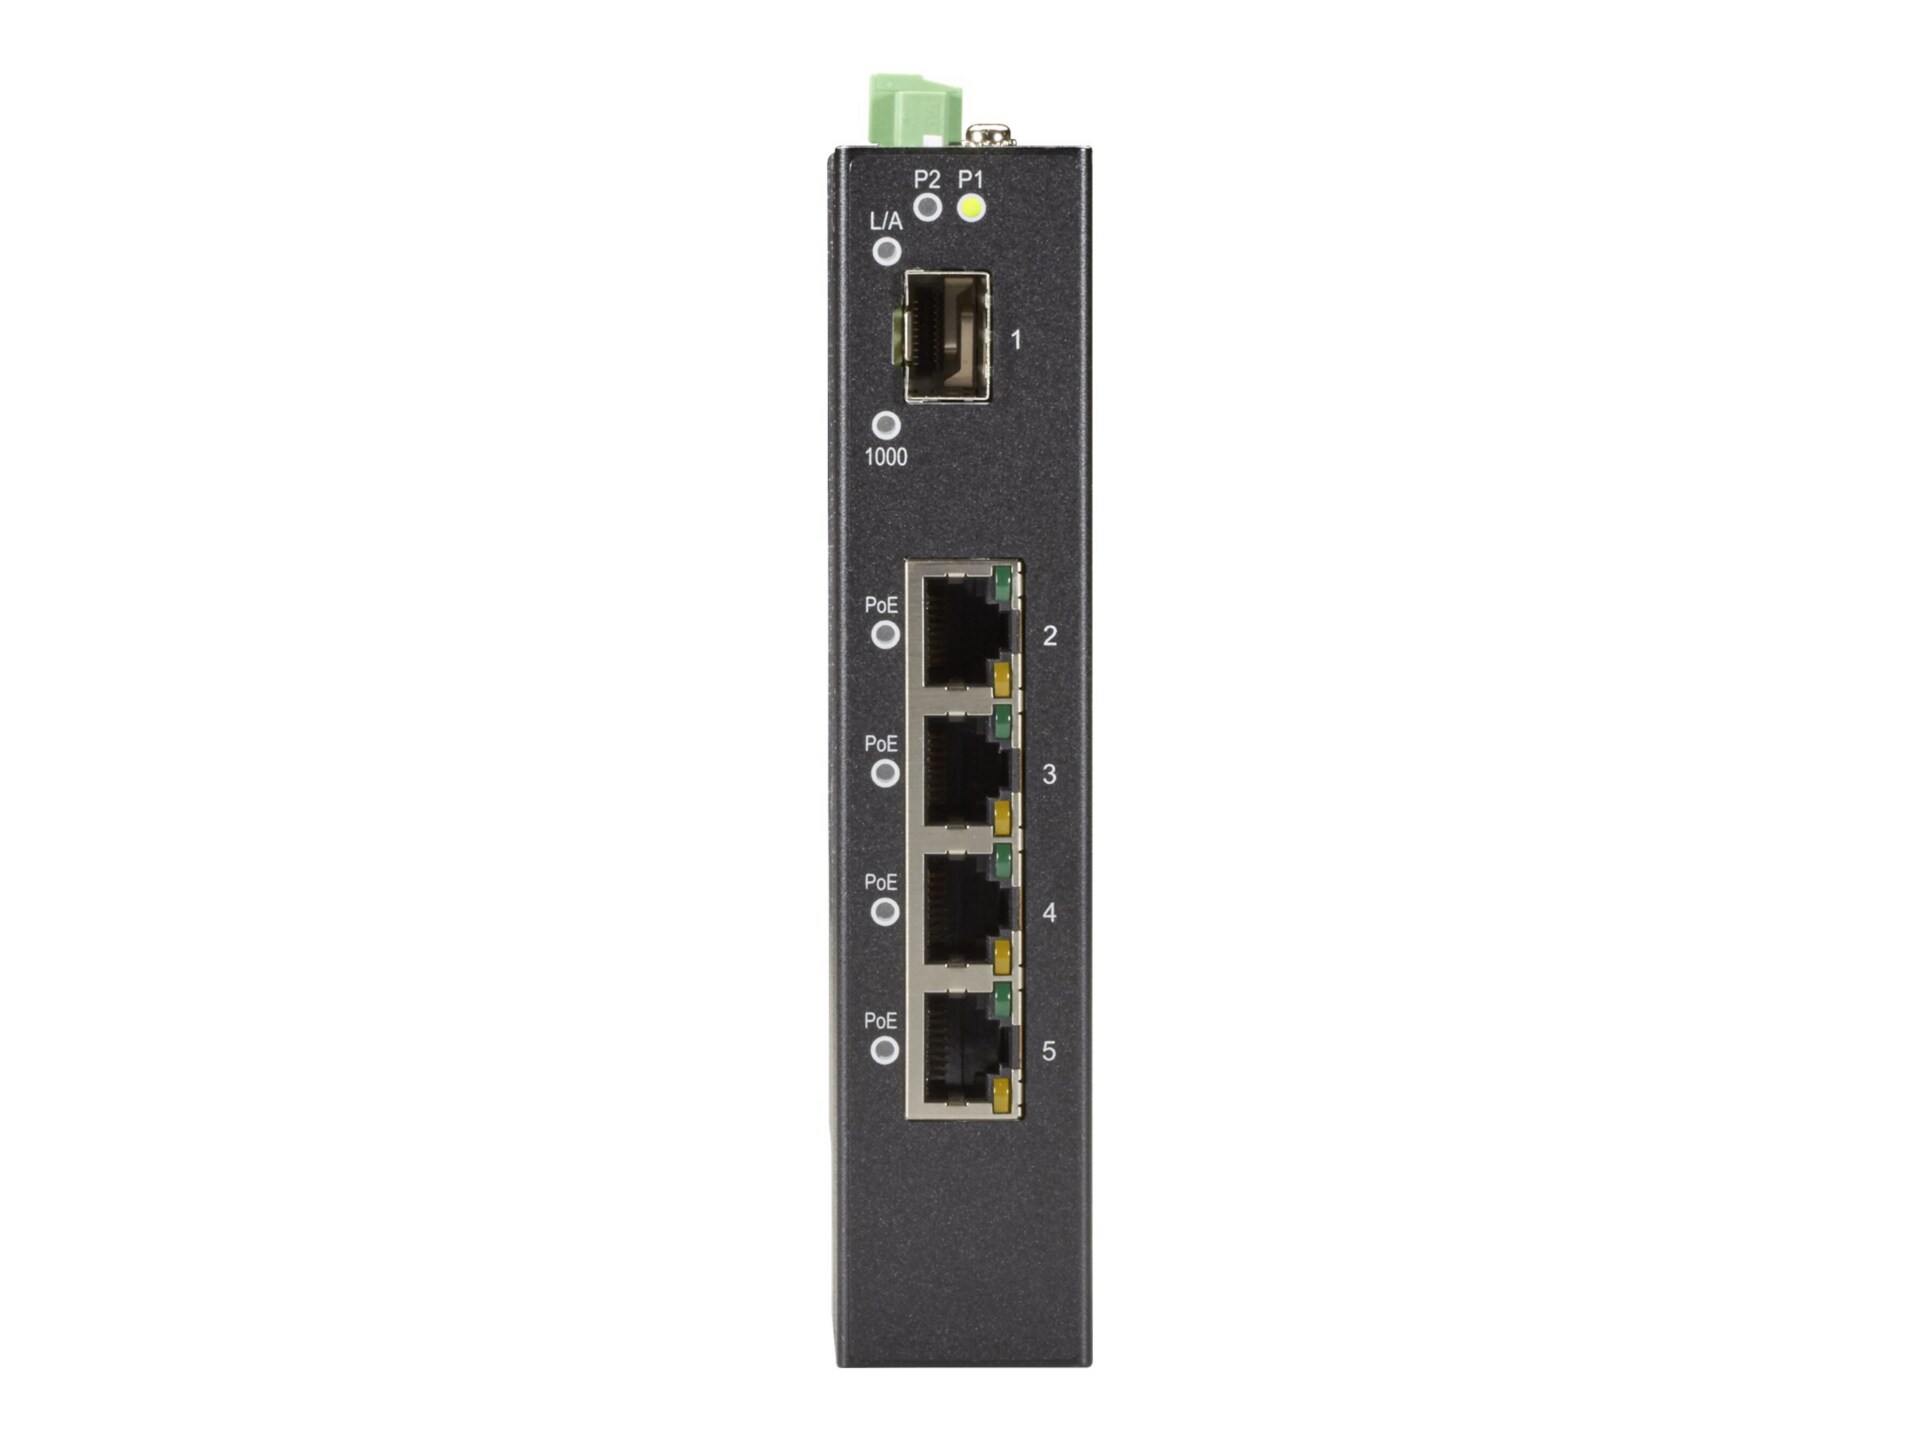 Shop Ethernet Switches